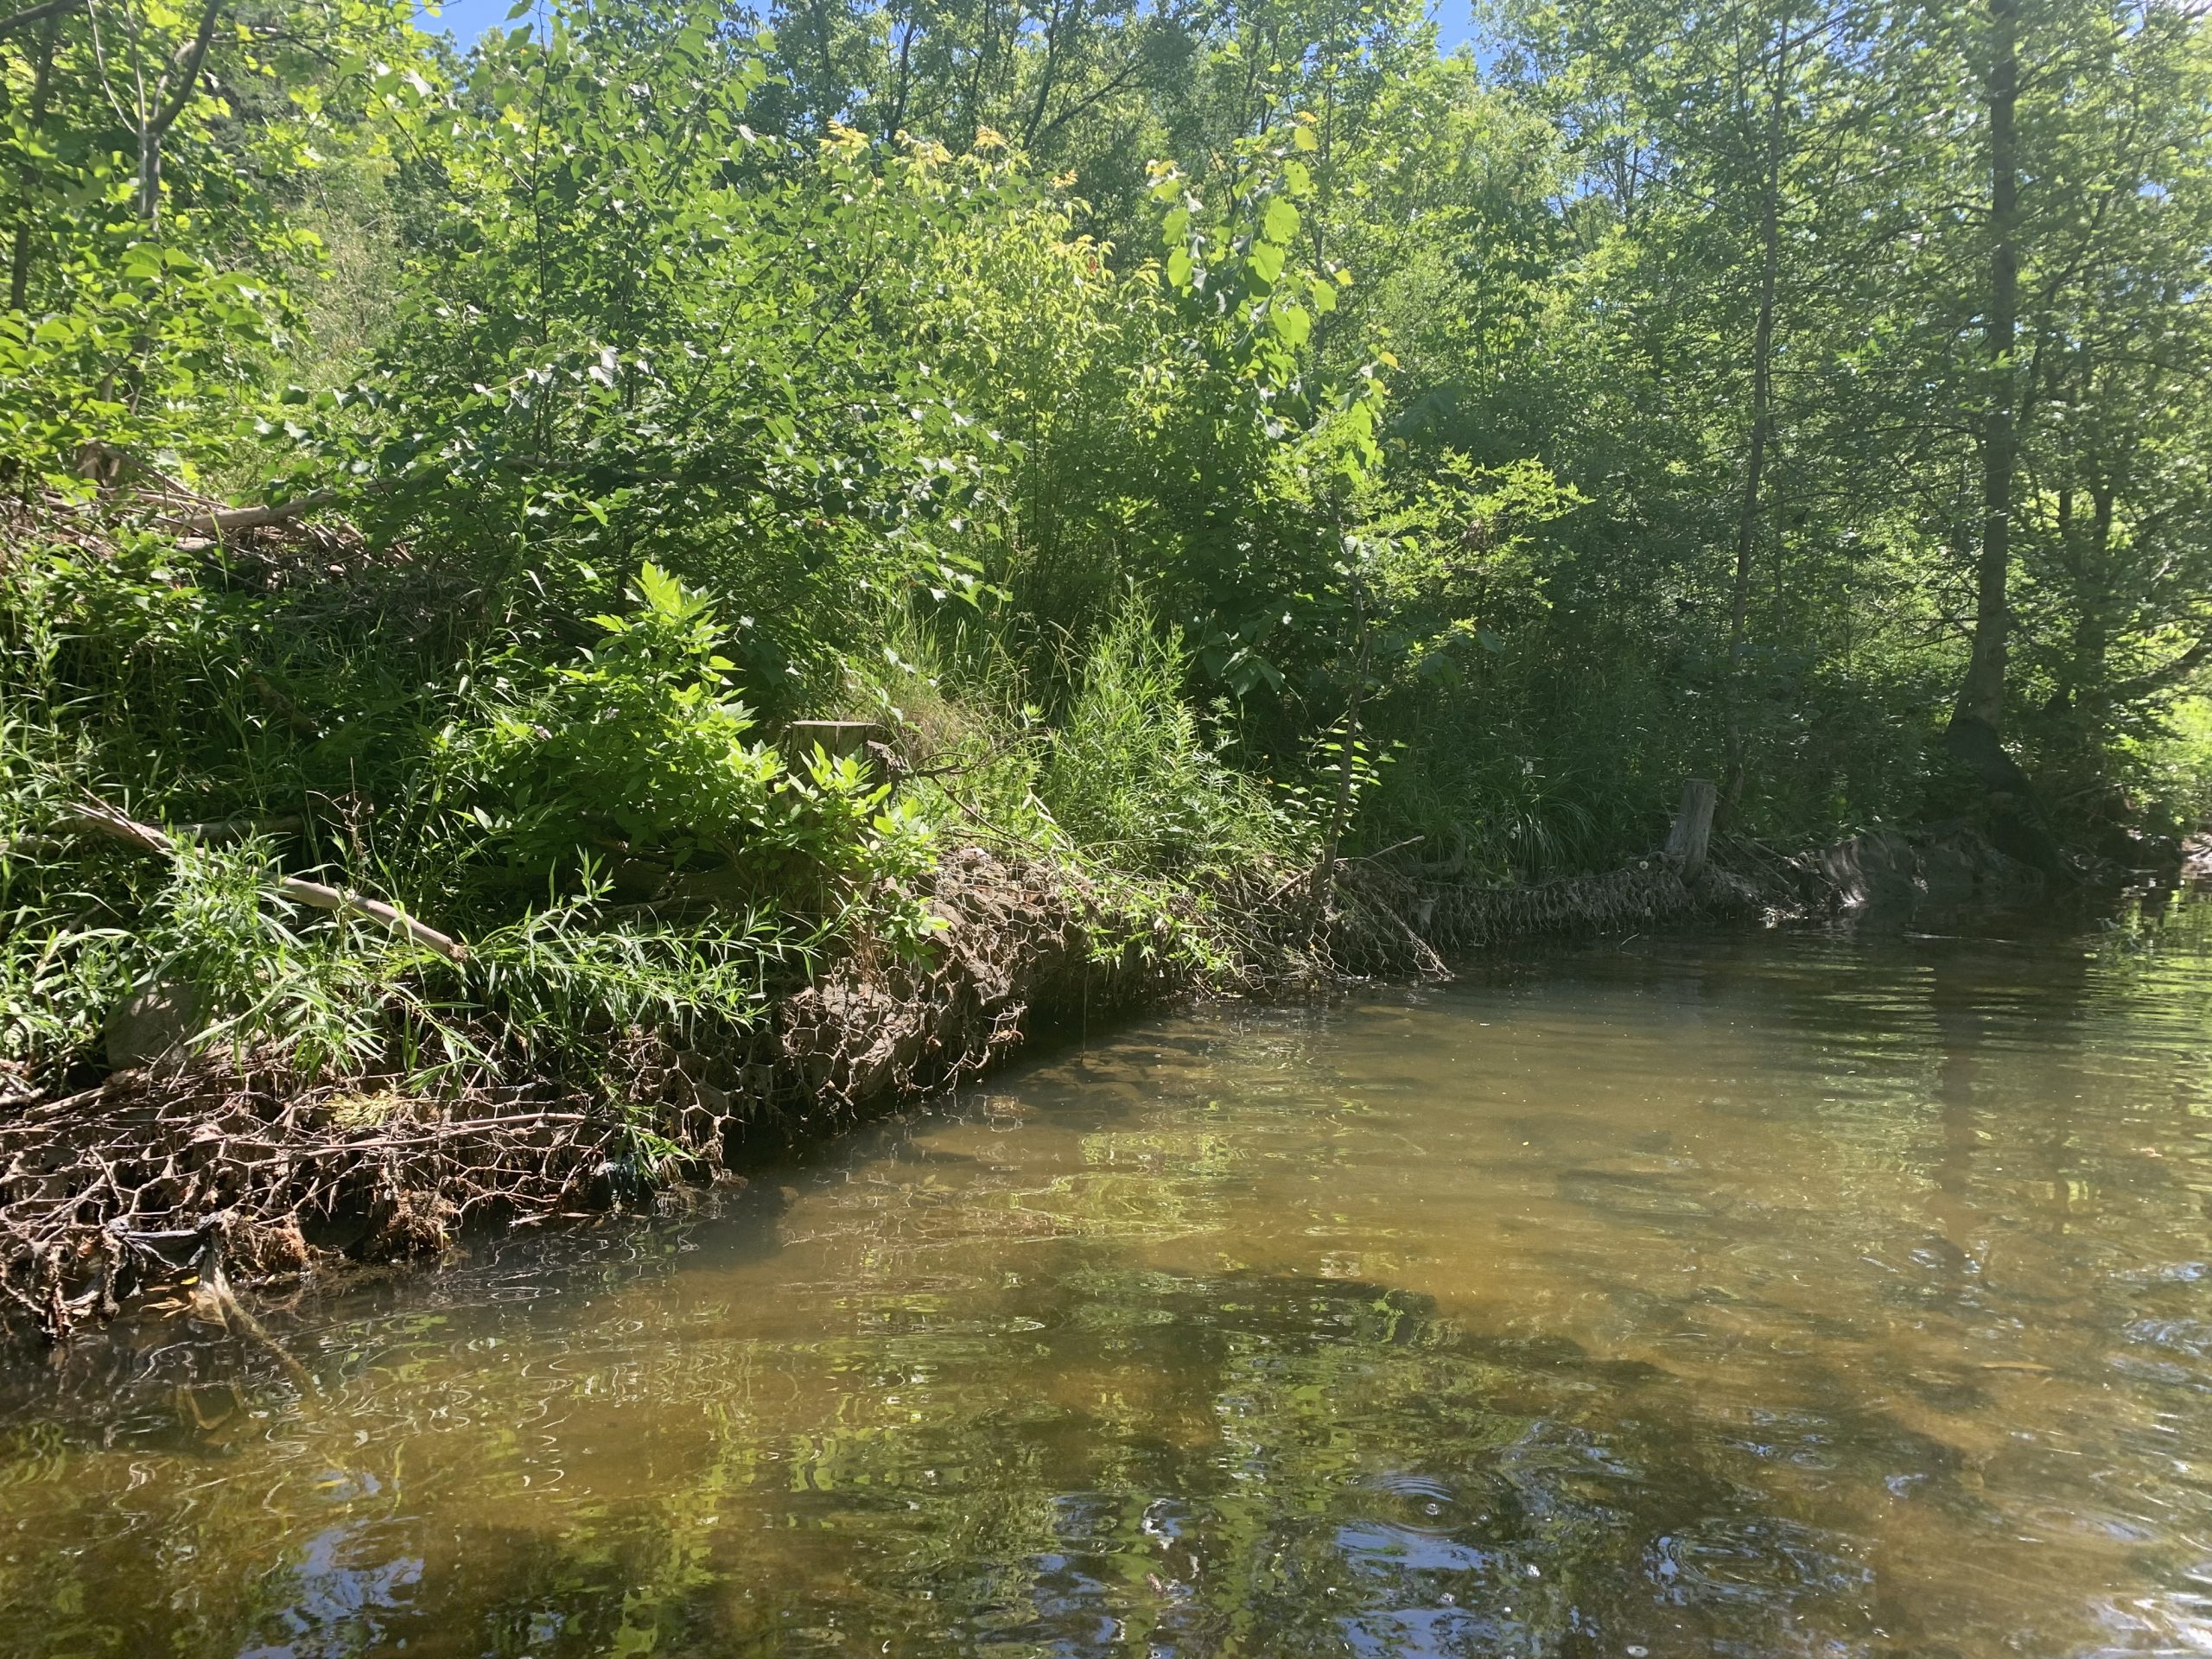 A section of Cooksville Creek experiencing erosion and elevated water levels.